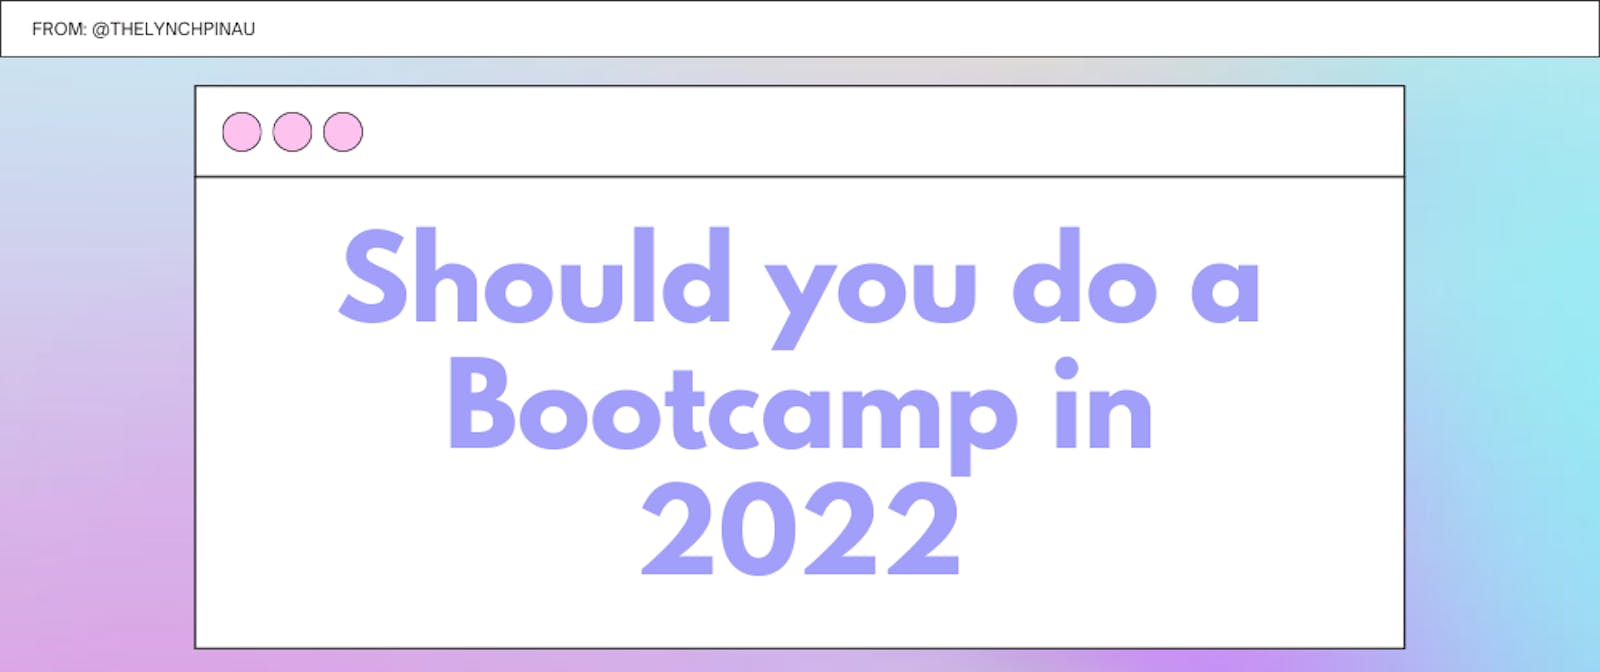 Should You do a Bootcamp in 2022?